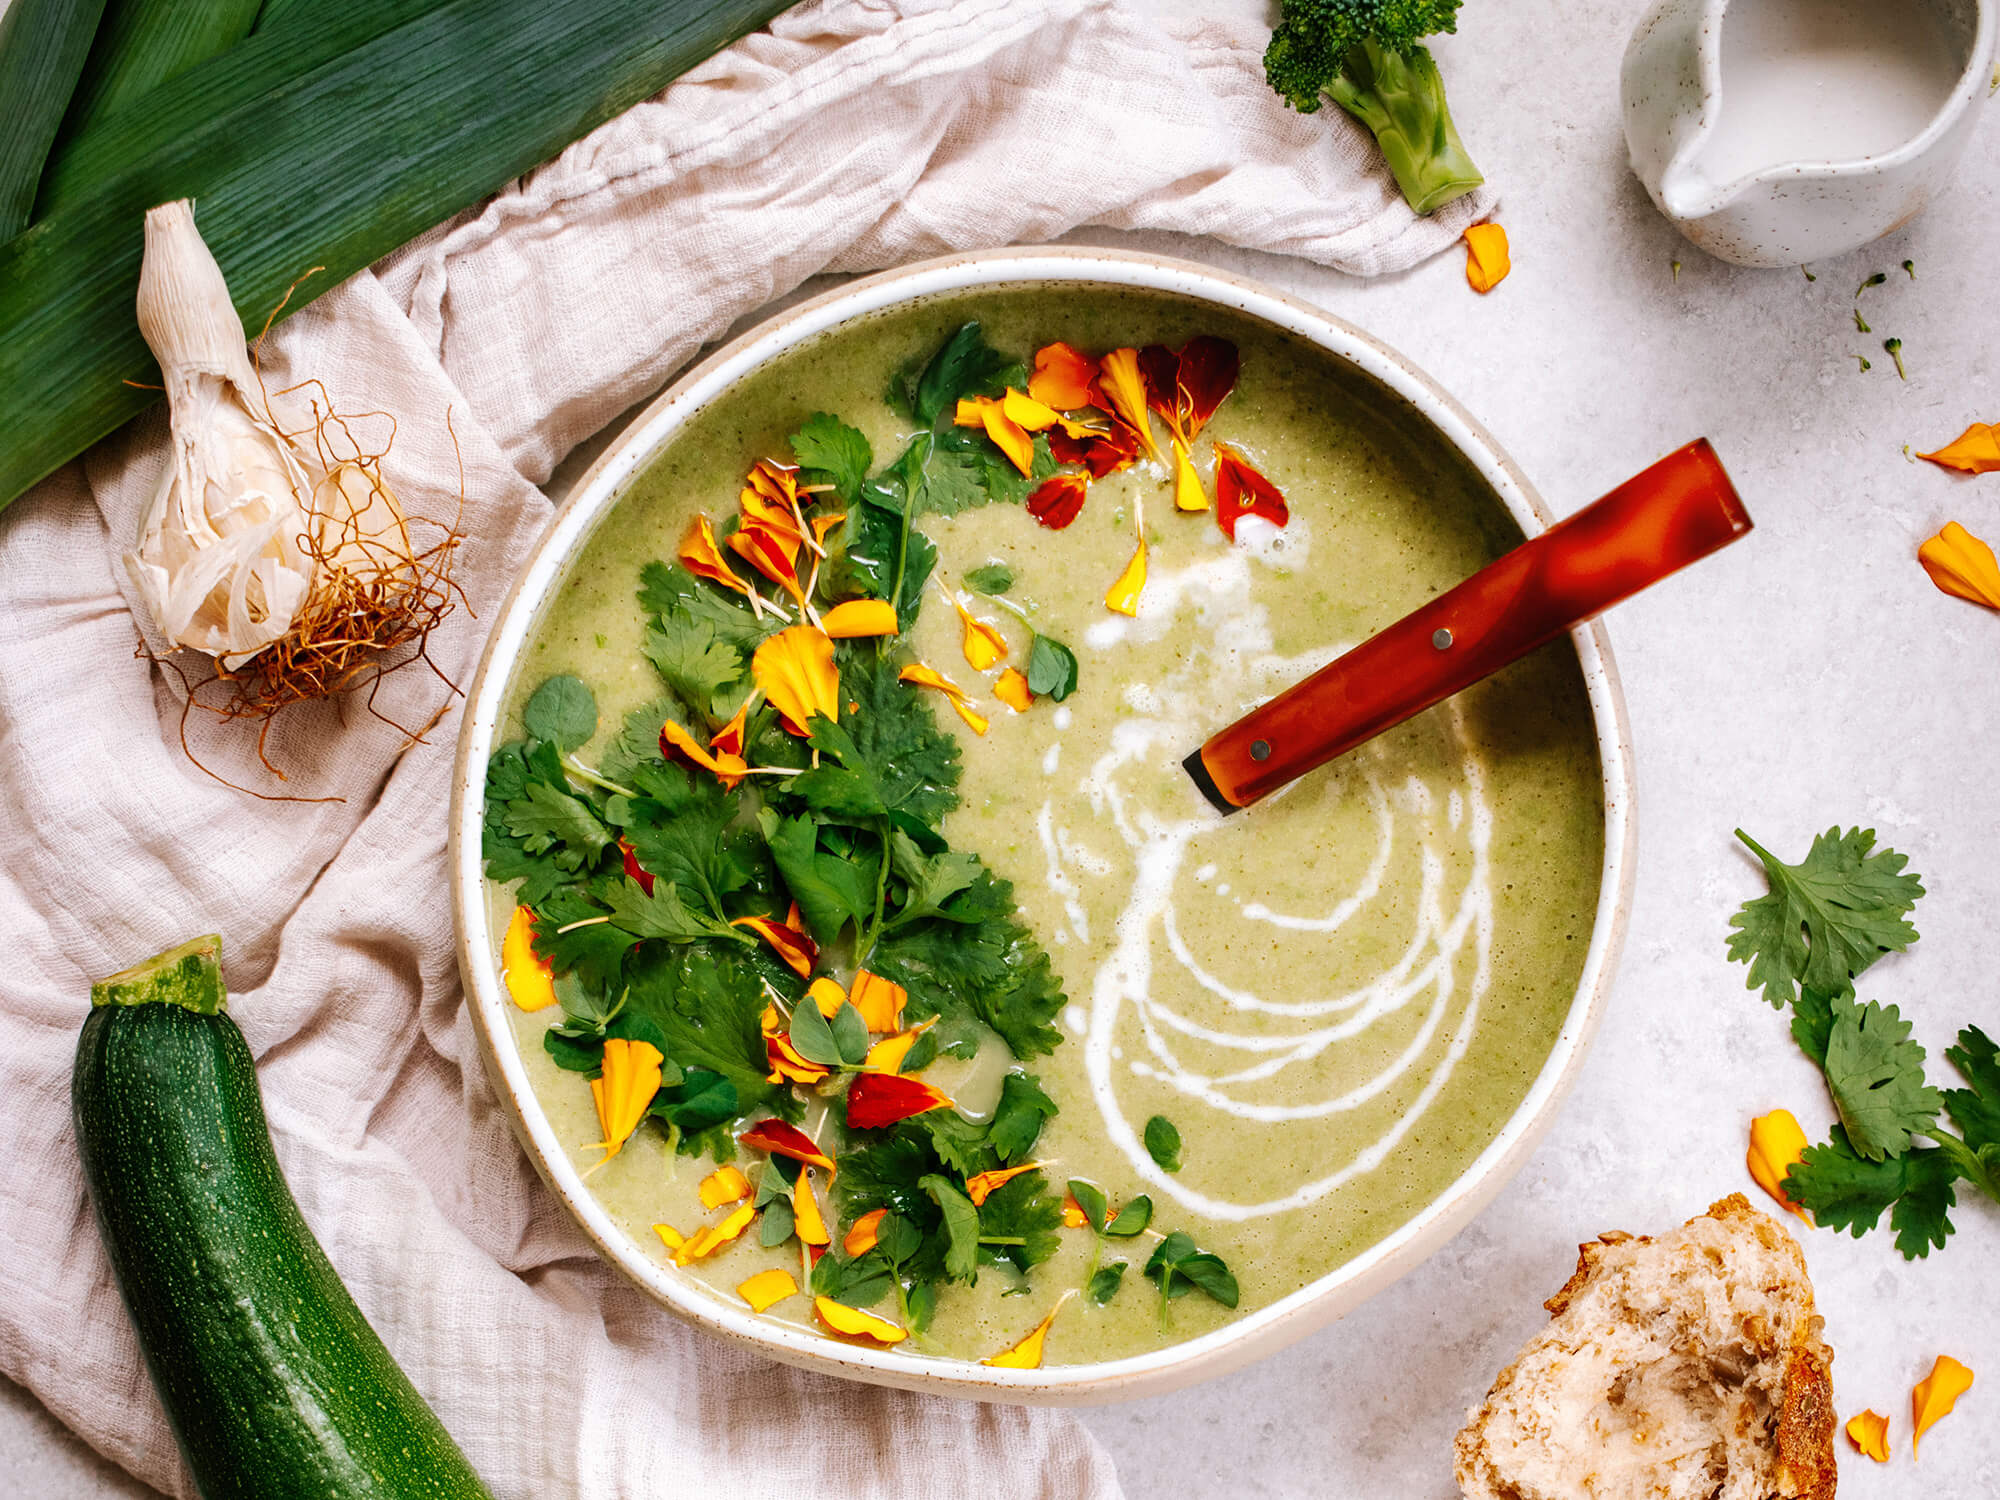 Featured image for “Super Green Vegetable Soup”